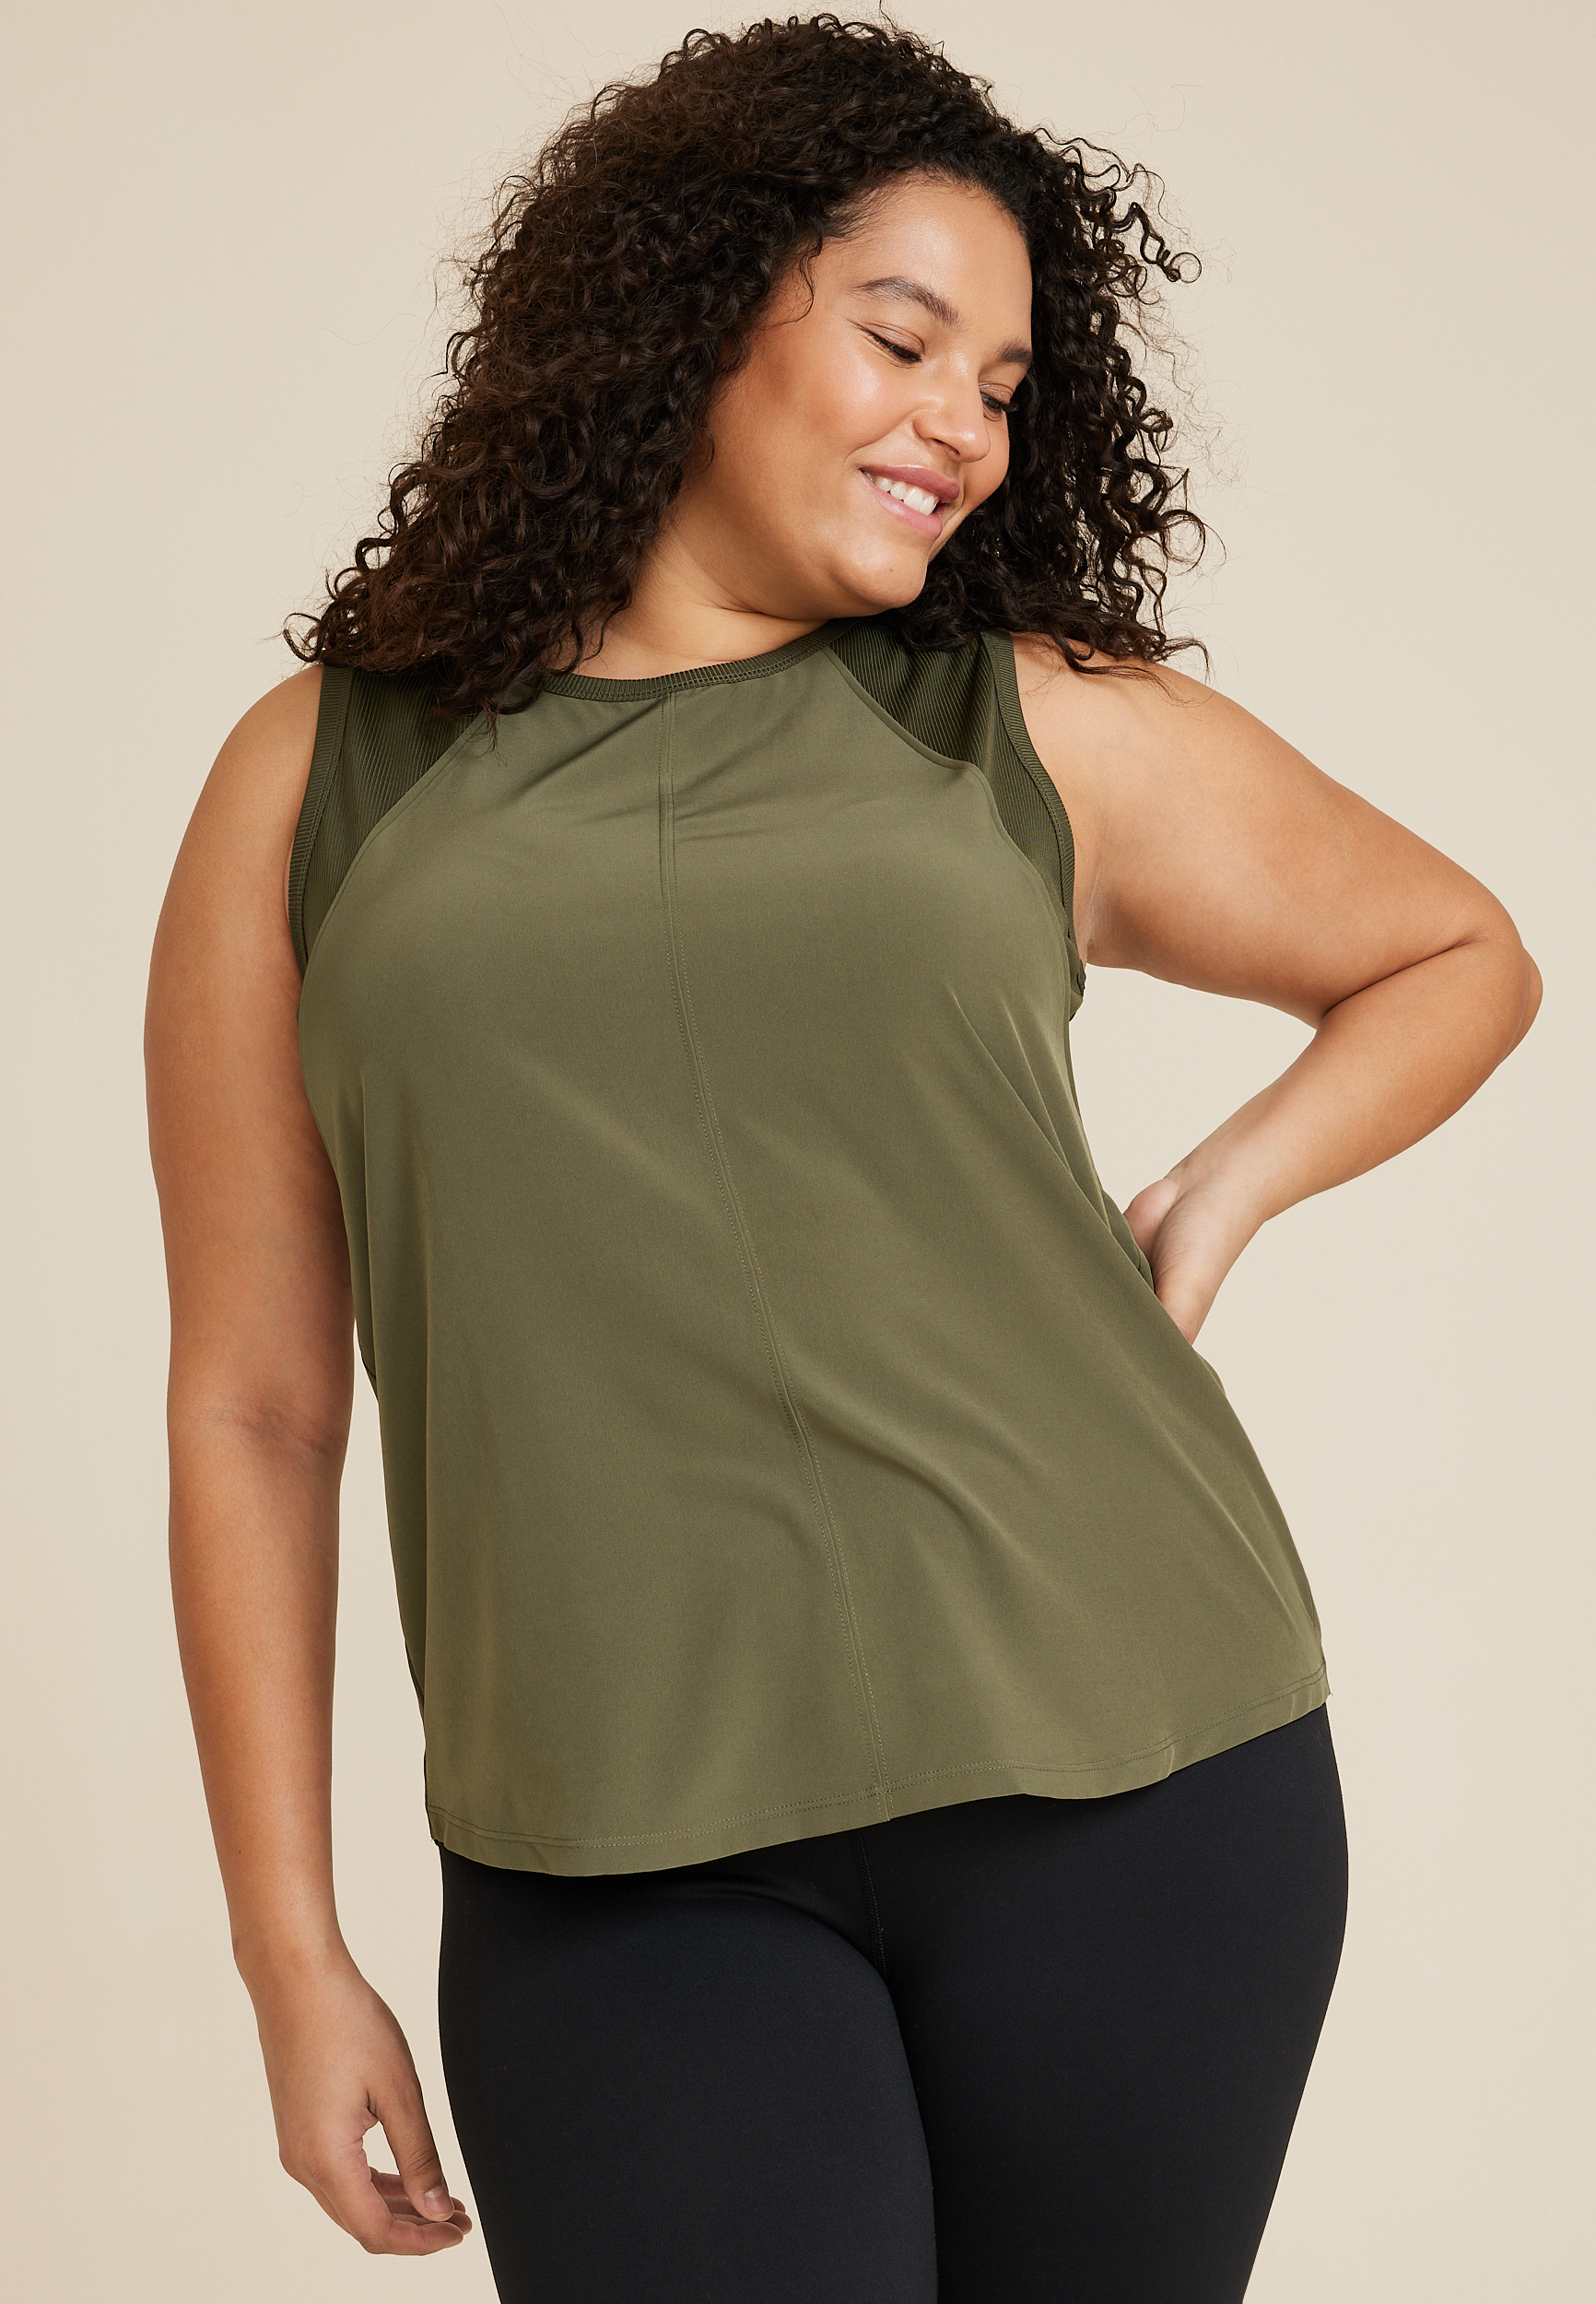 DIVAMORE Lace Tank Tops for Women, Plus Size, Camisole for Women